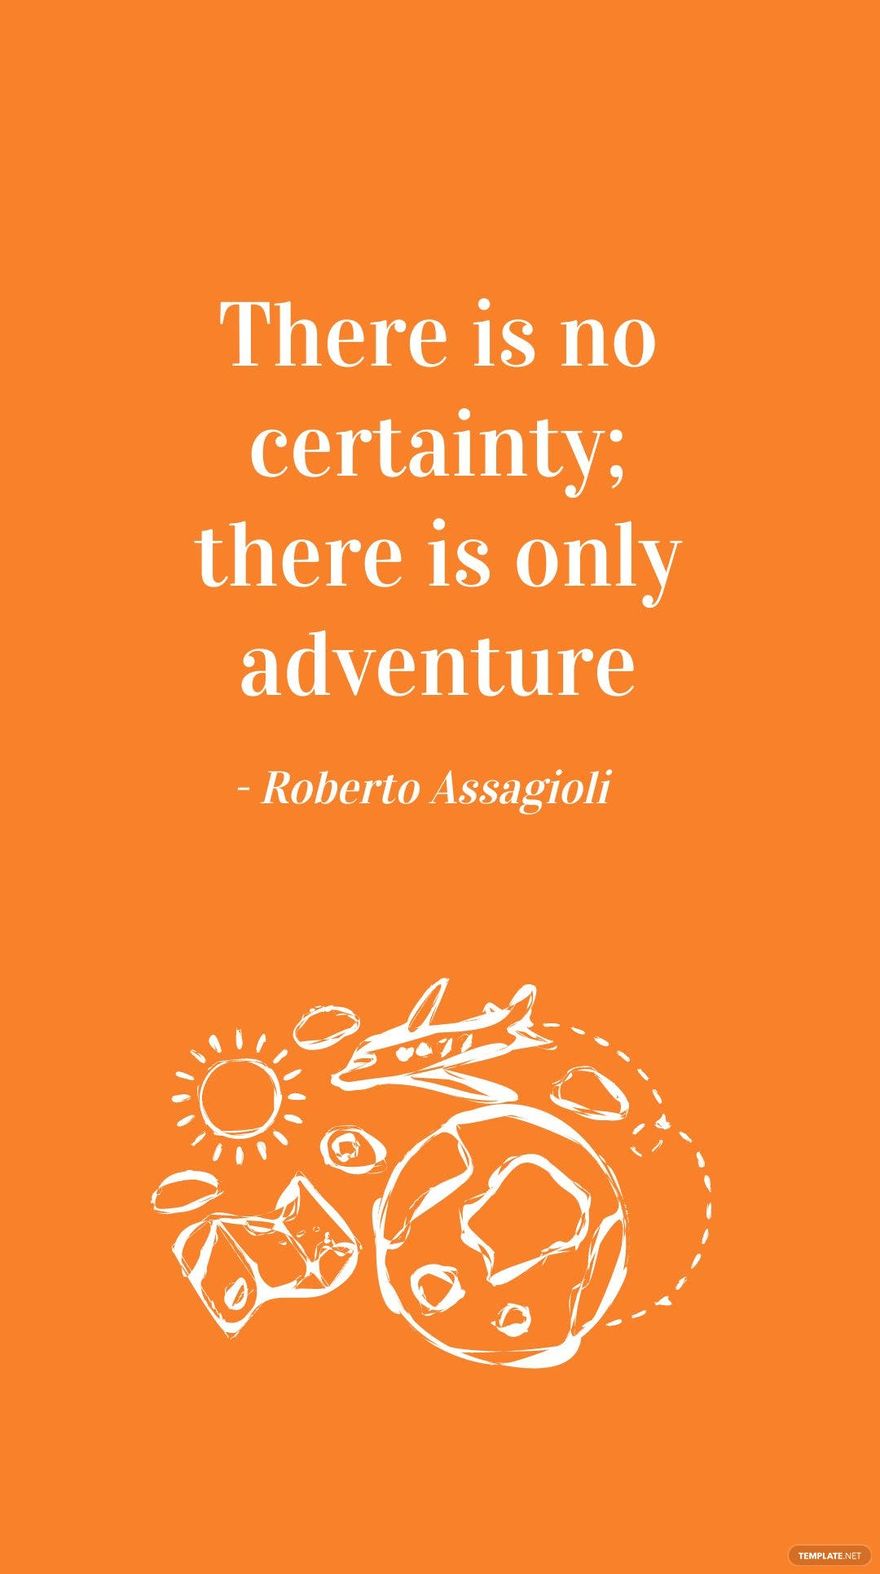 Free Roberto Assagioli - There is no certainty; there is only adventure in JPG